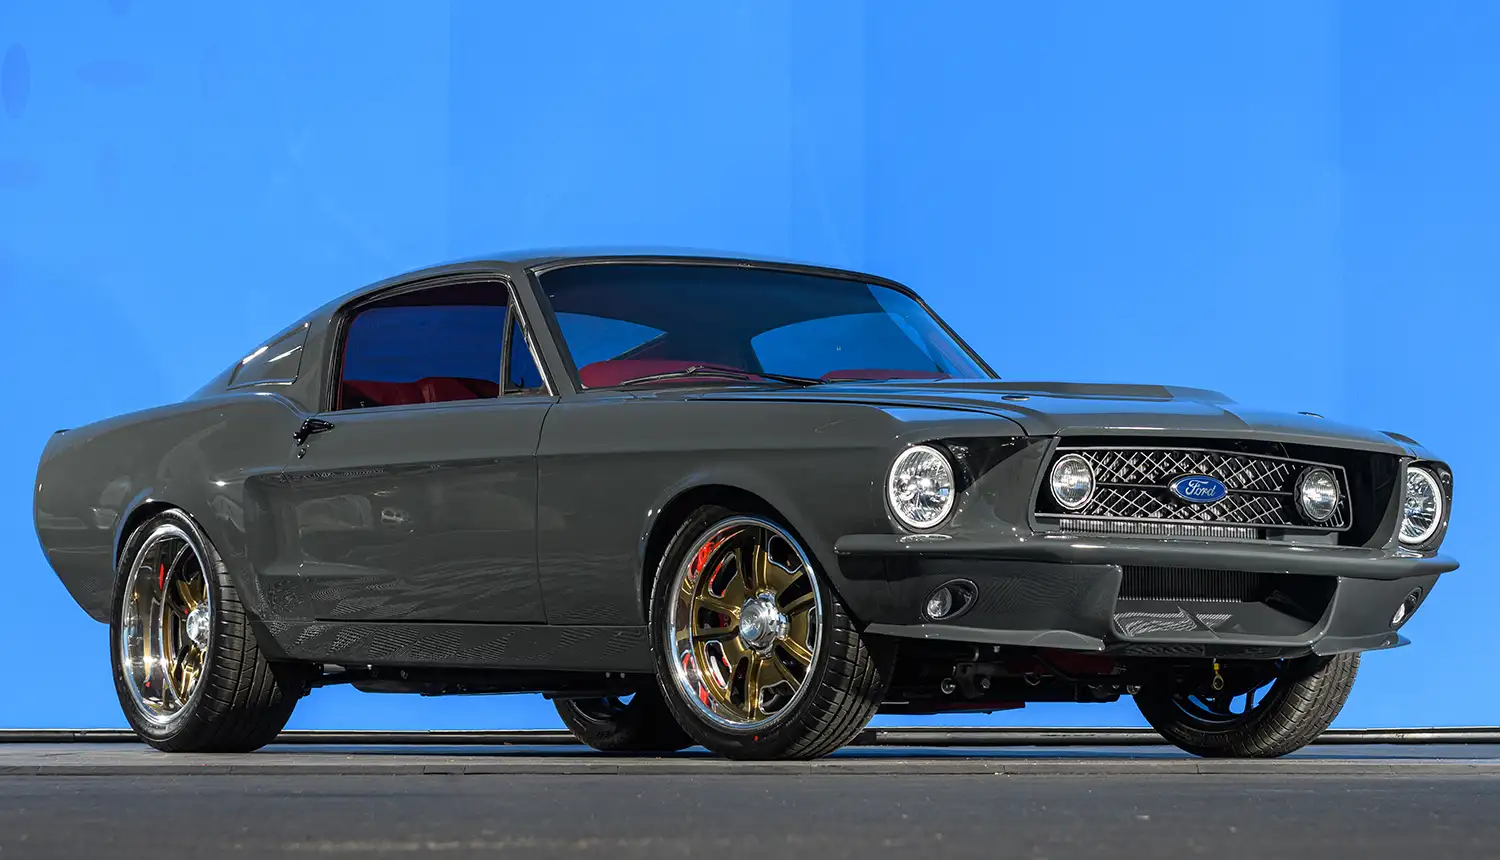 1968 Ford Mustang Fastback – The Pegasus Project